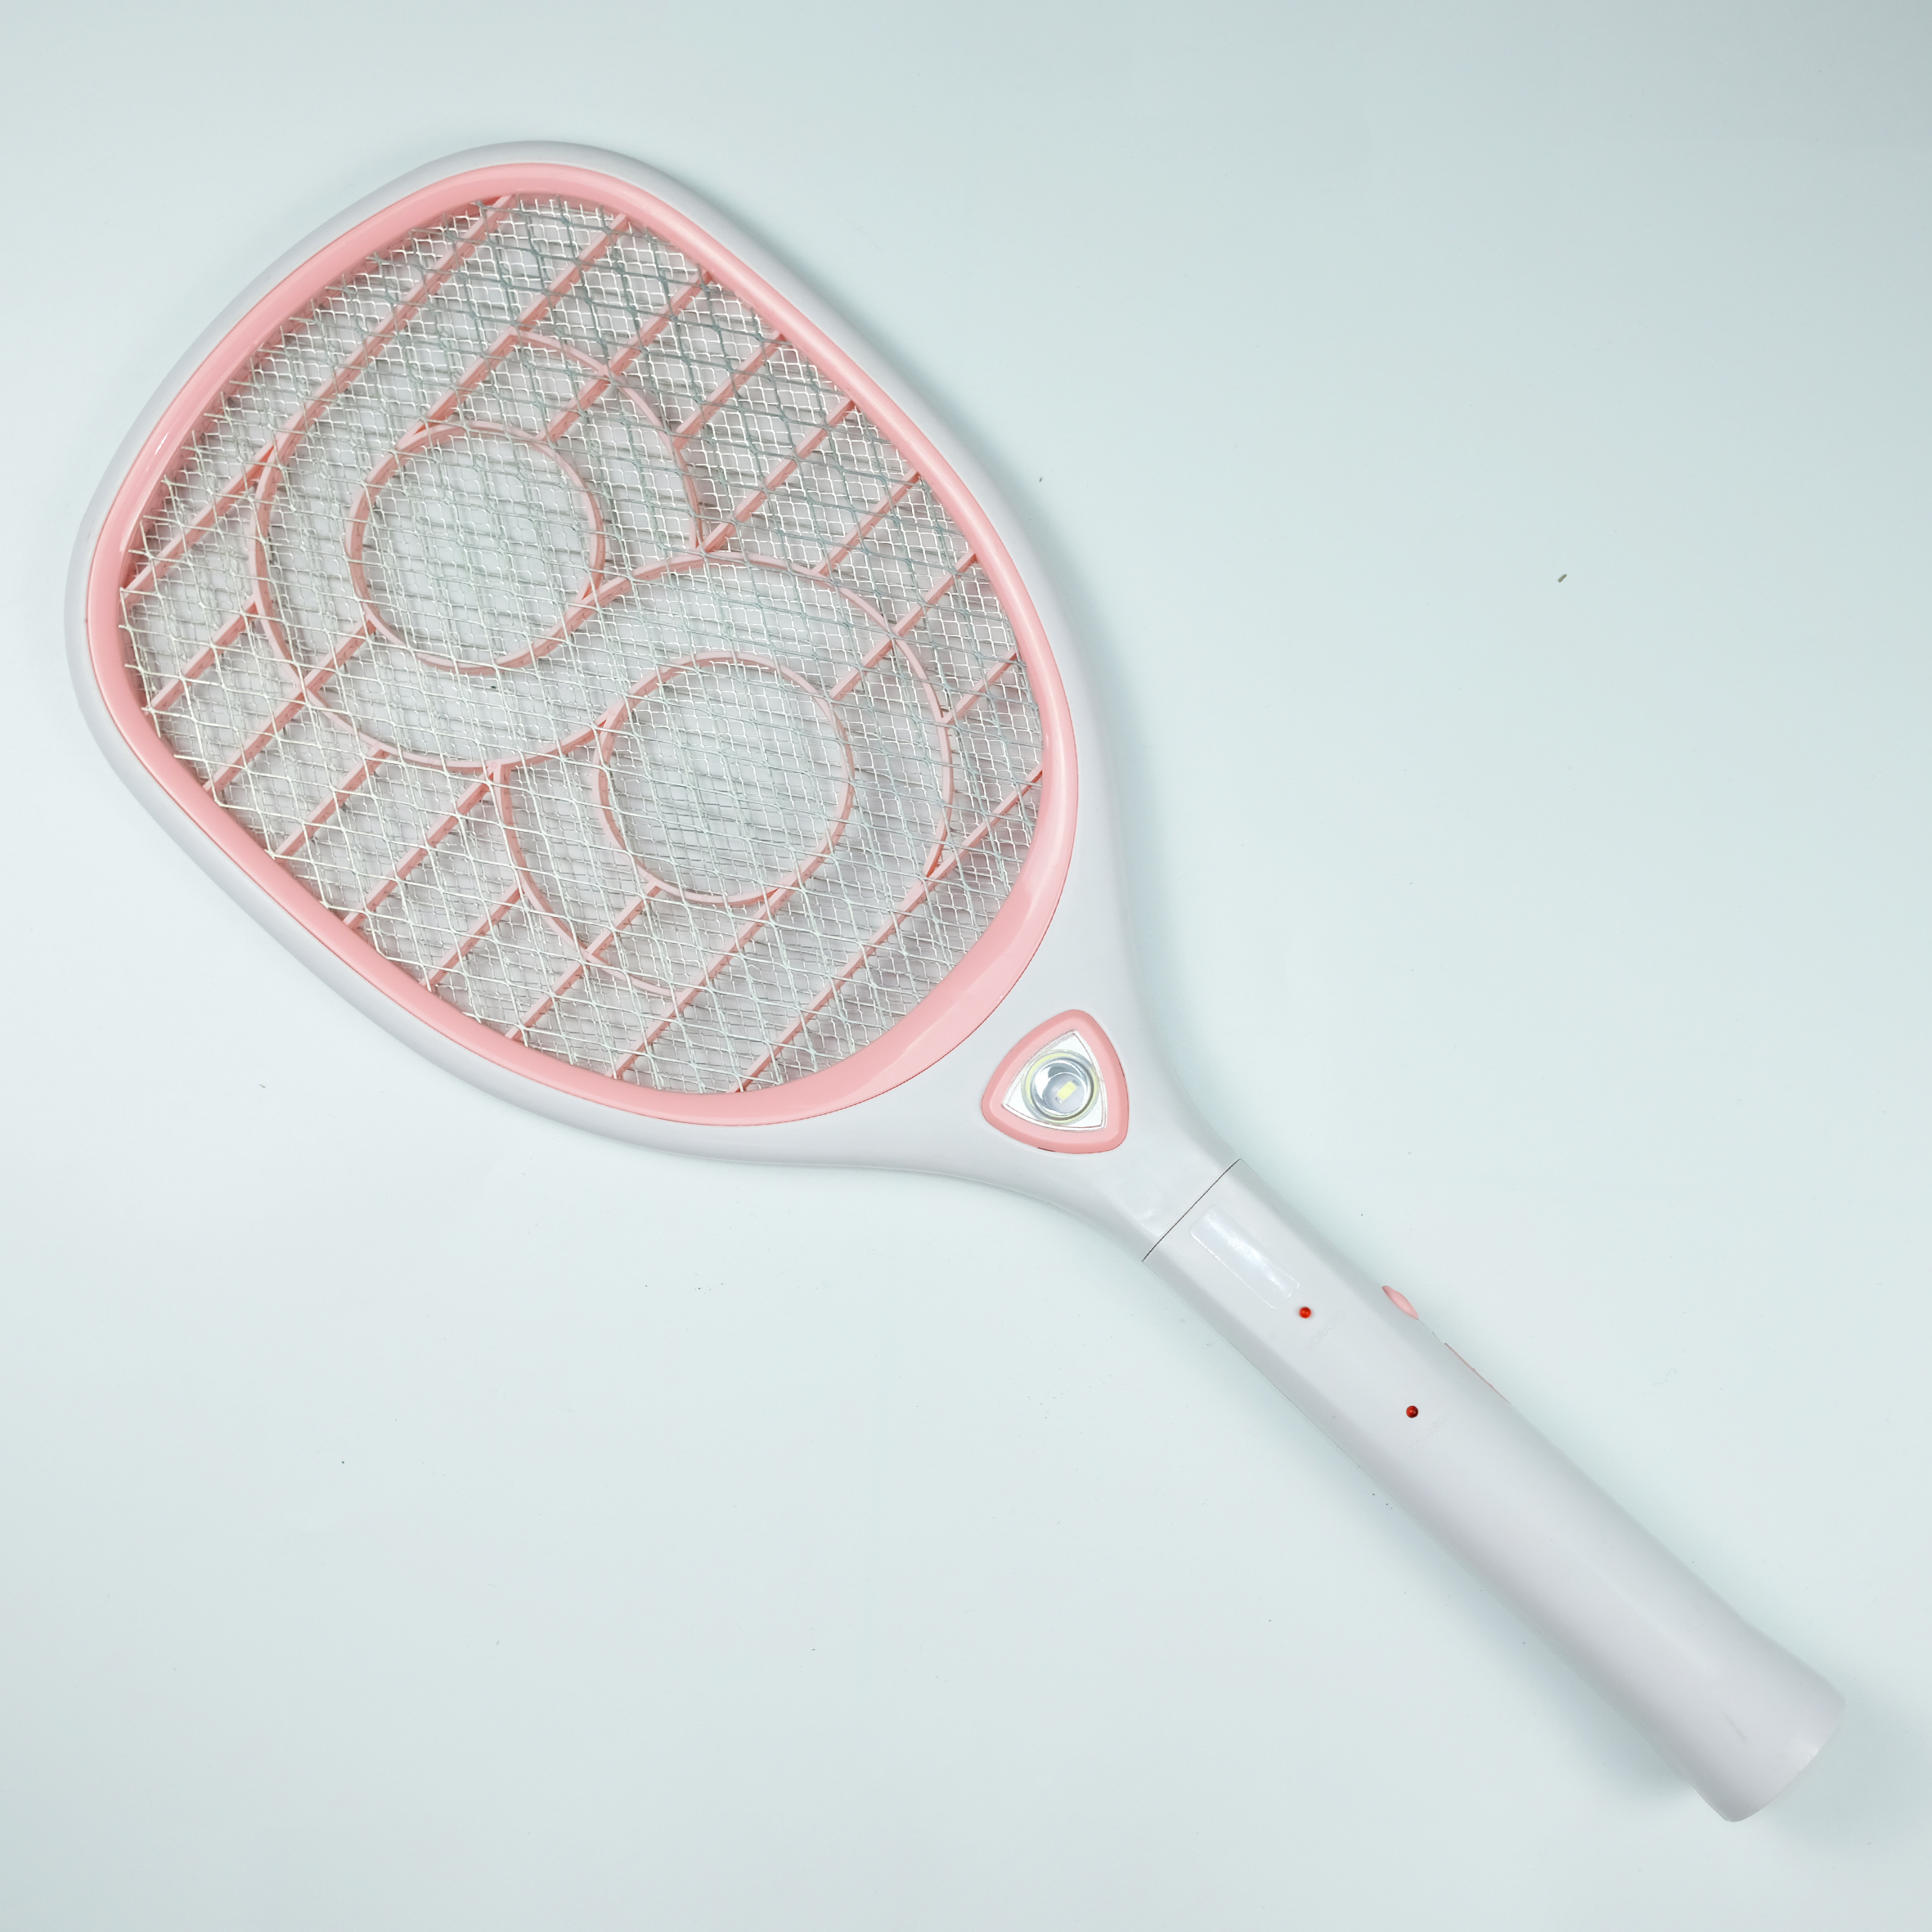 LED light electric rechargeable mosquito swatter with cable